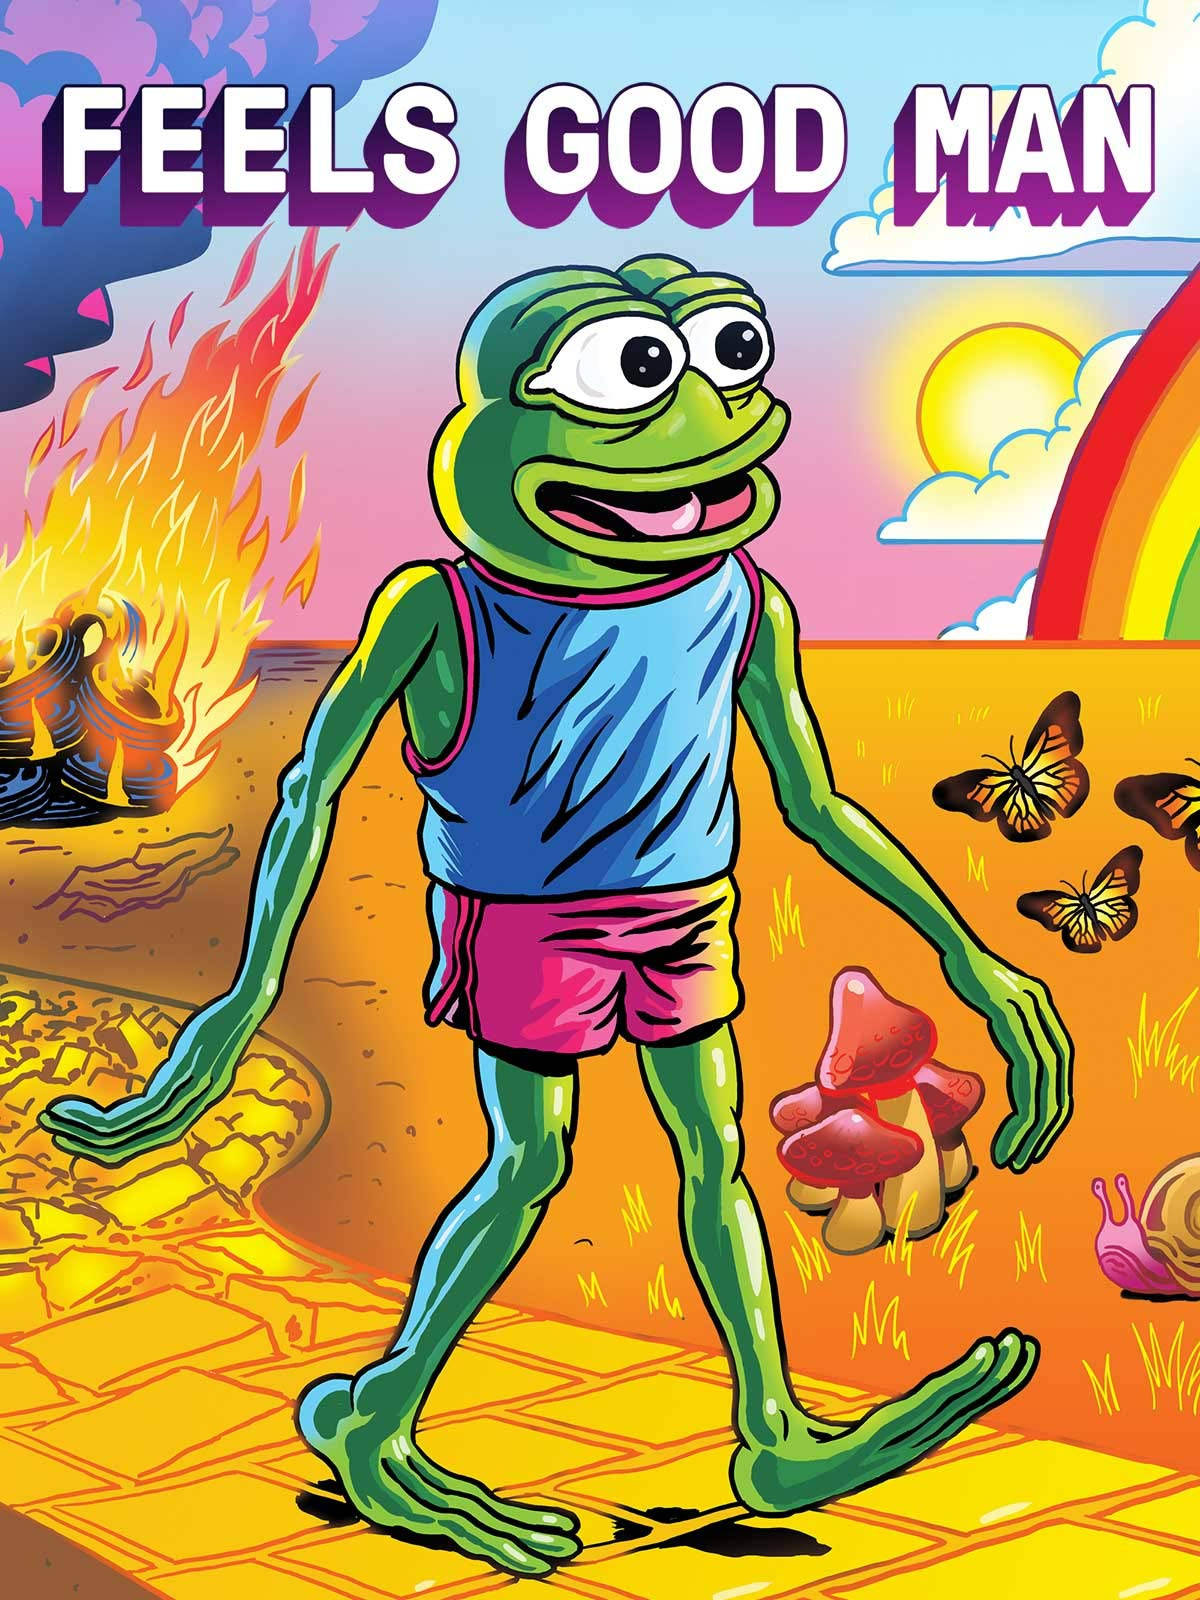 Pepe The Frog Feels Good Man Background